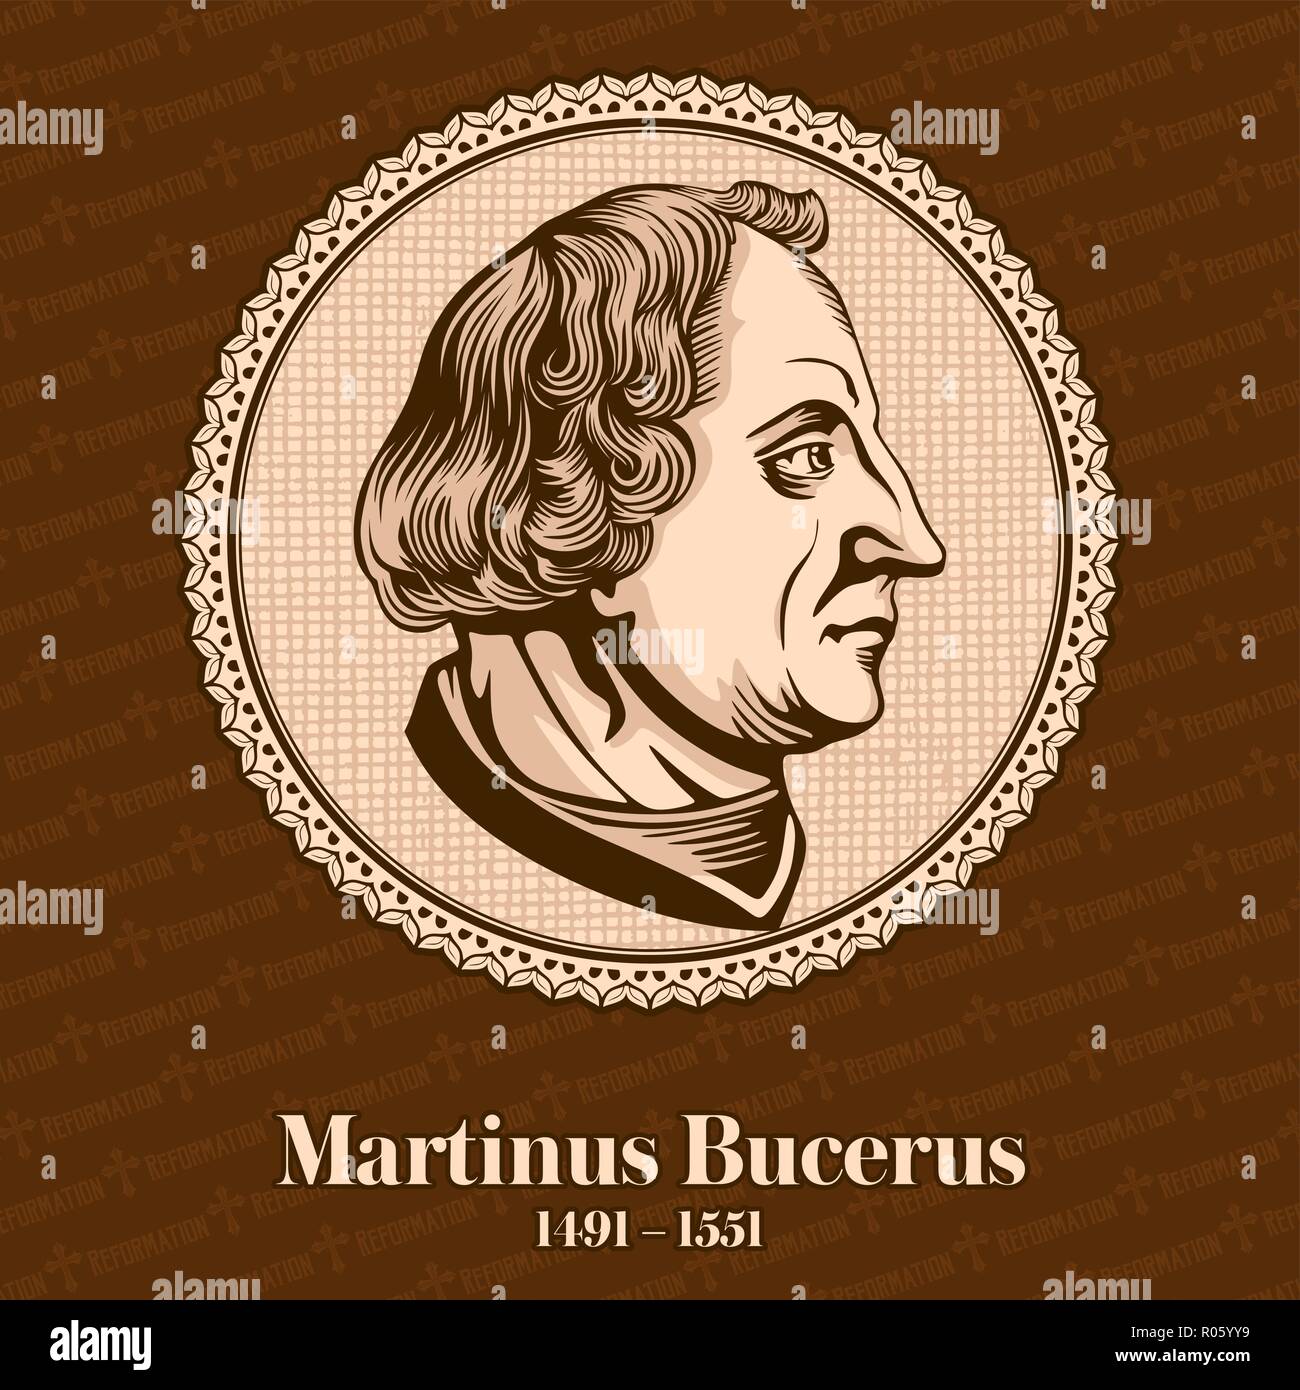 Martin Bucer (1491 – 1551) was a German Protestant reformer in the Reformed tradition based in Strasbourg who influenced Lutheran, Calvinist Stock Vector